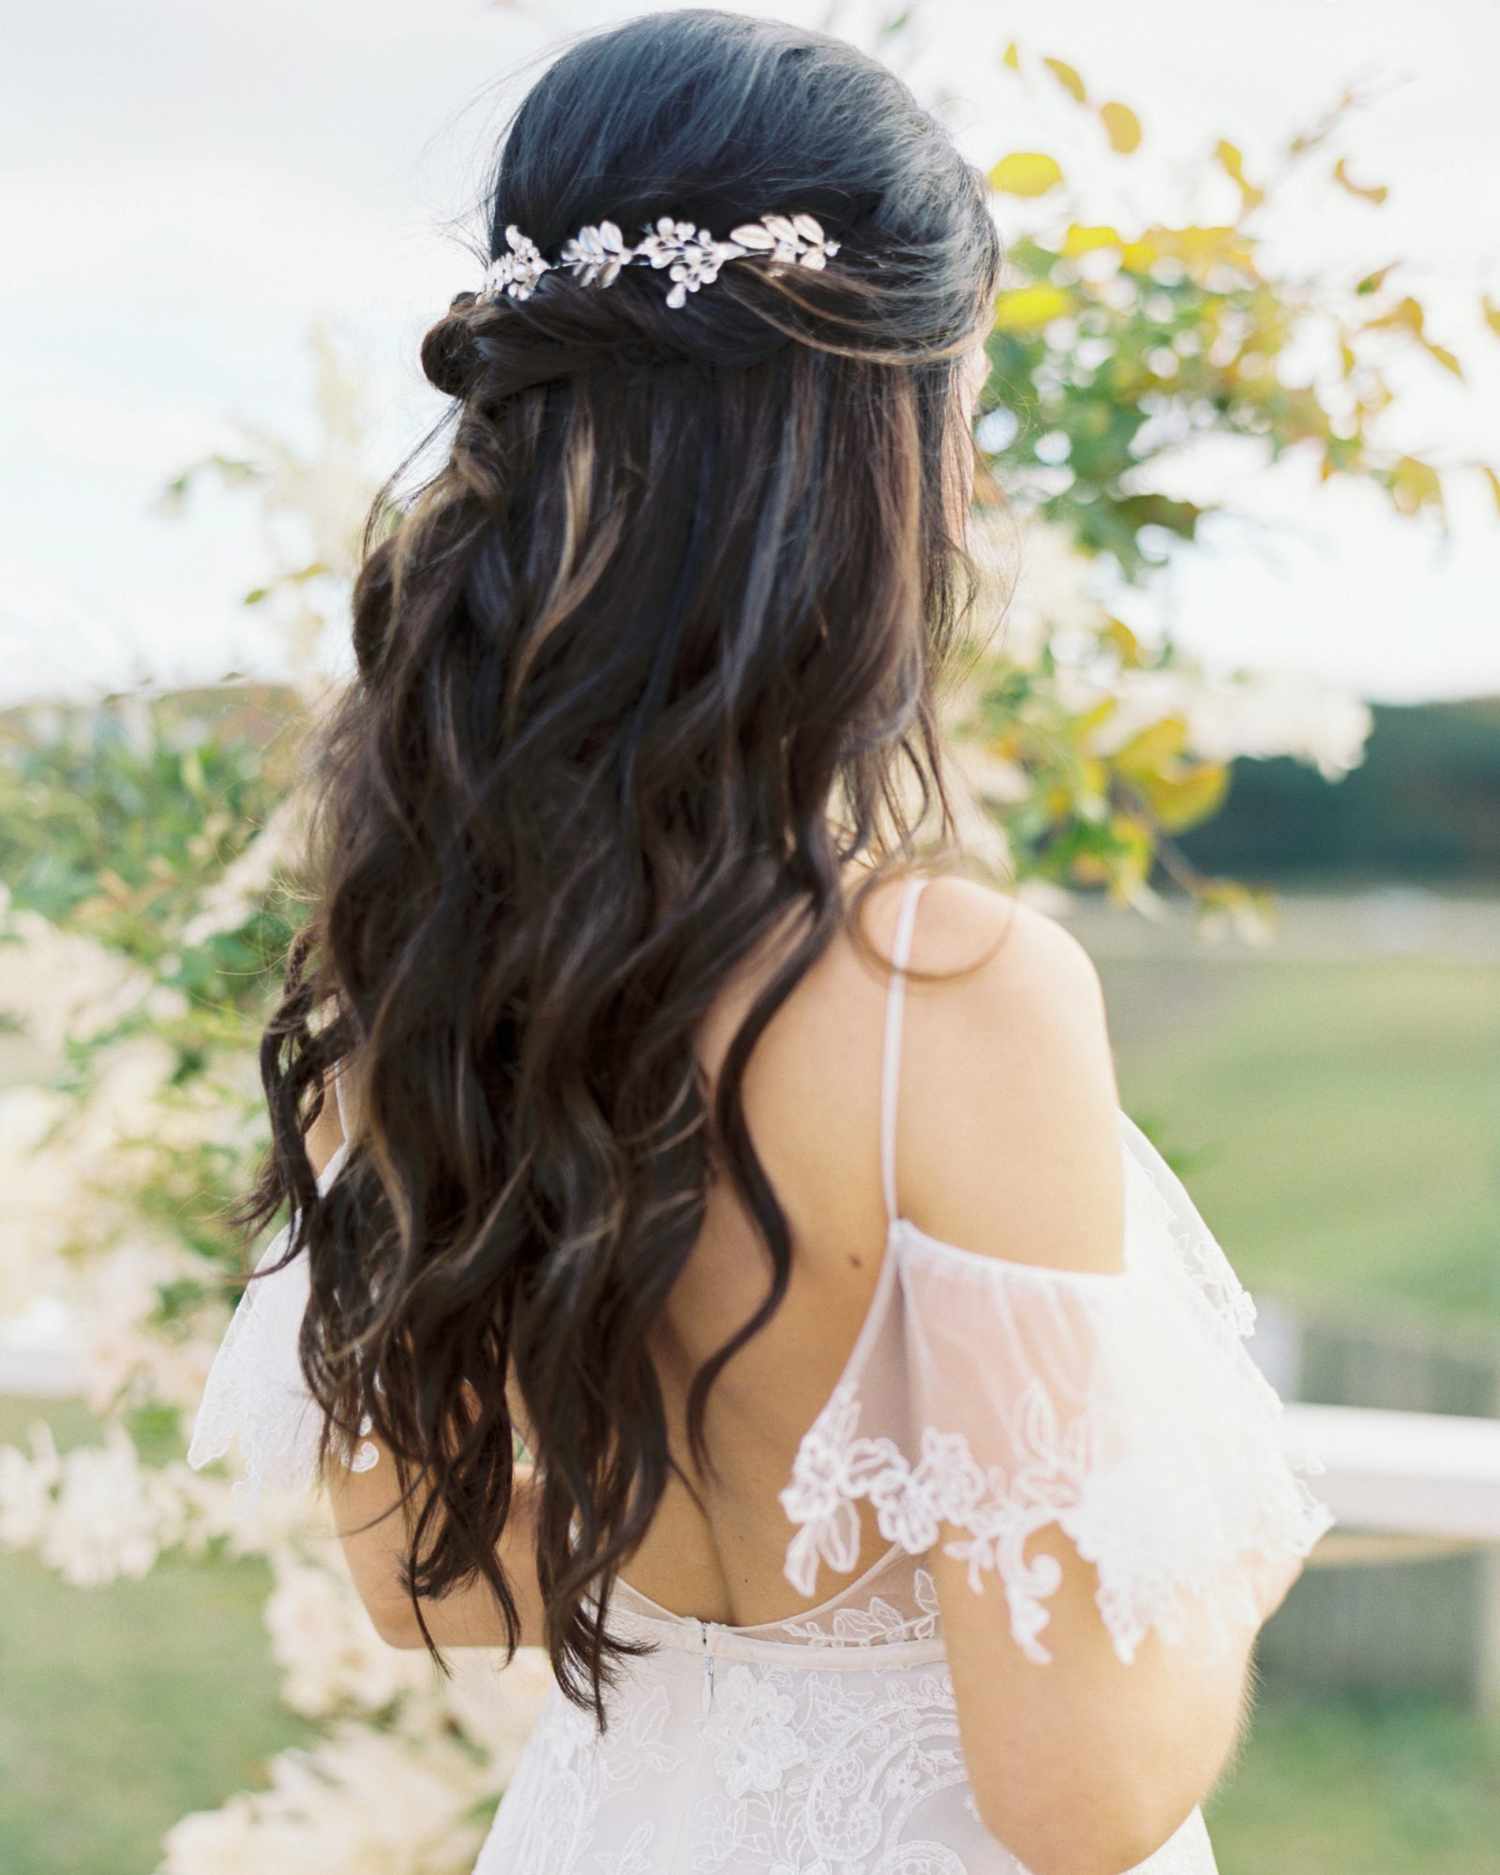 sparkly, leaf-like hairpiece in half-up half-down hairstyle